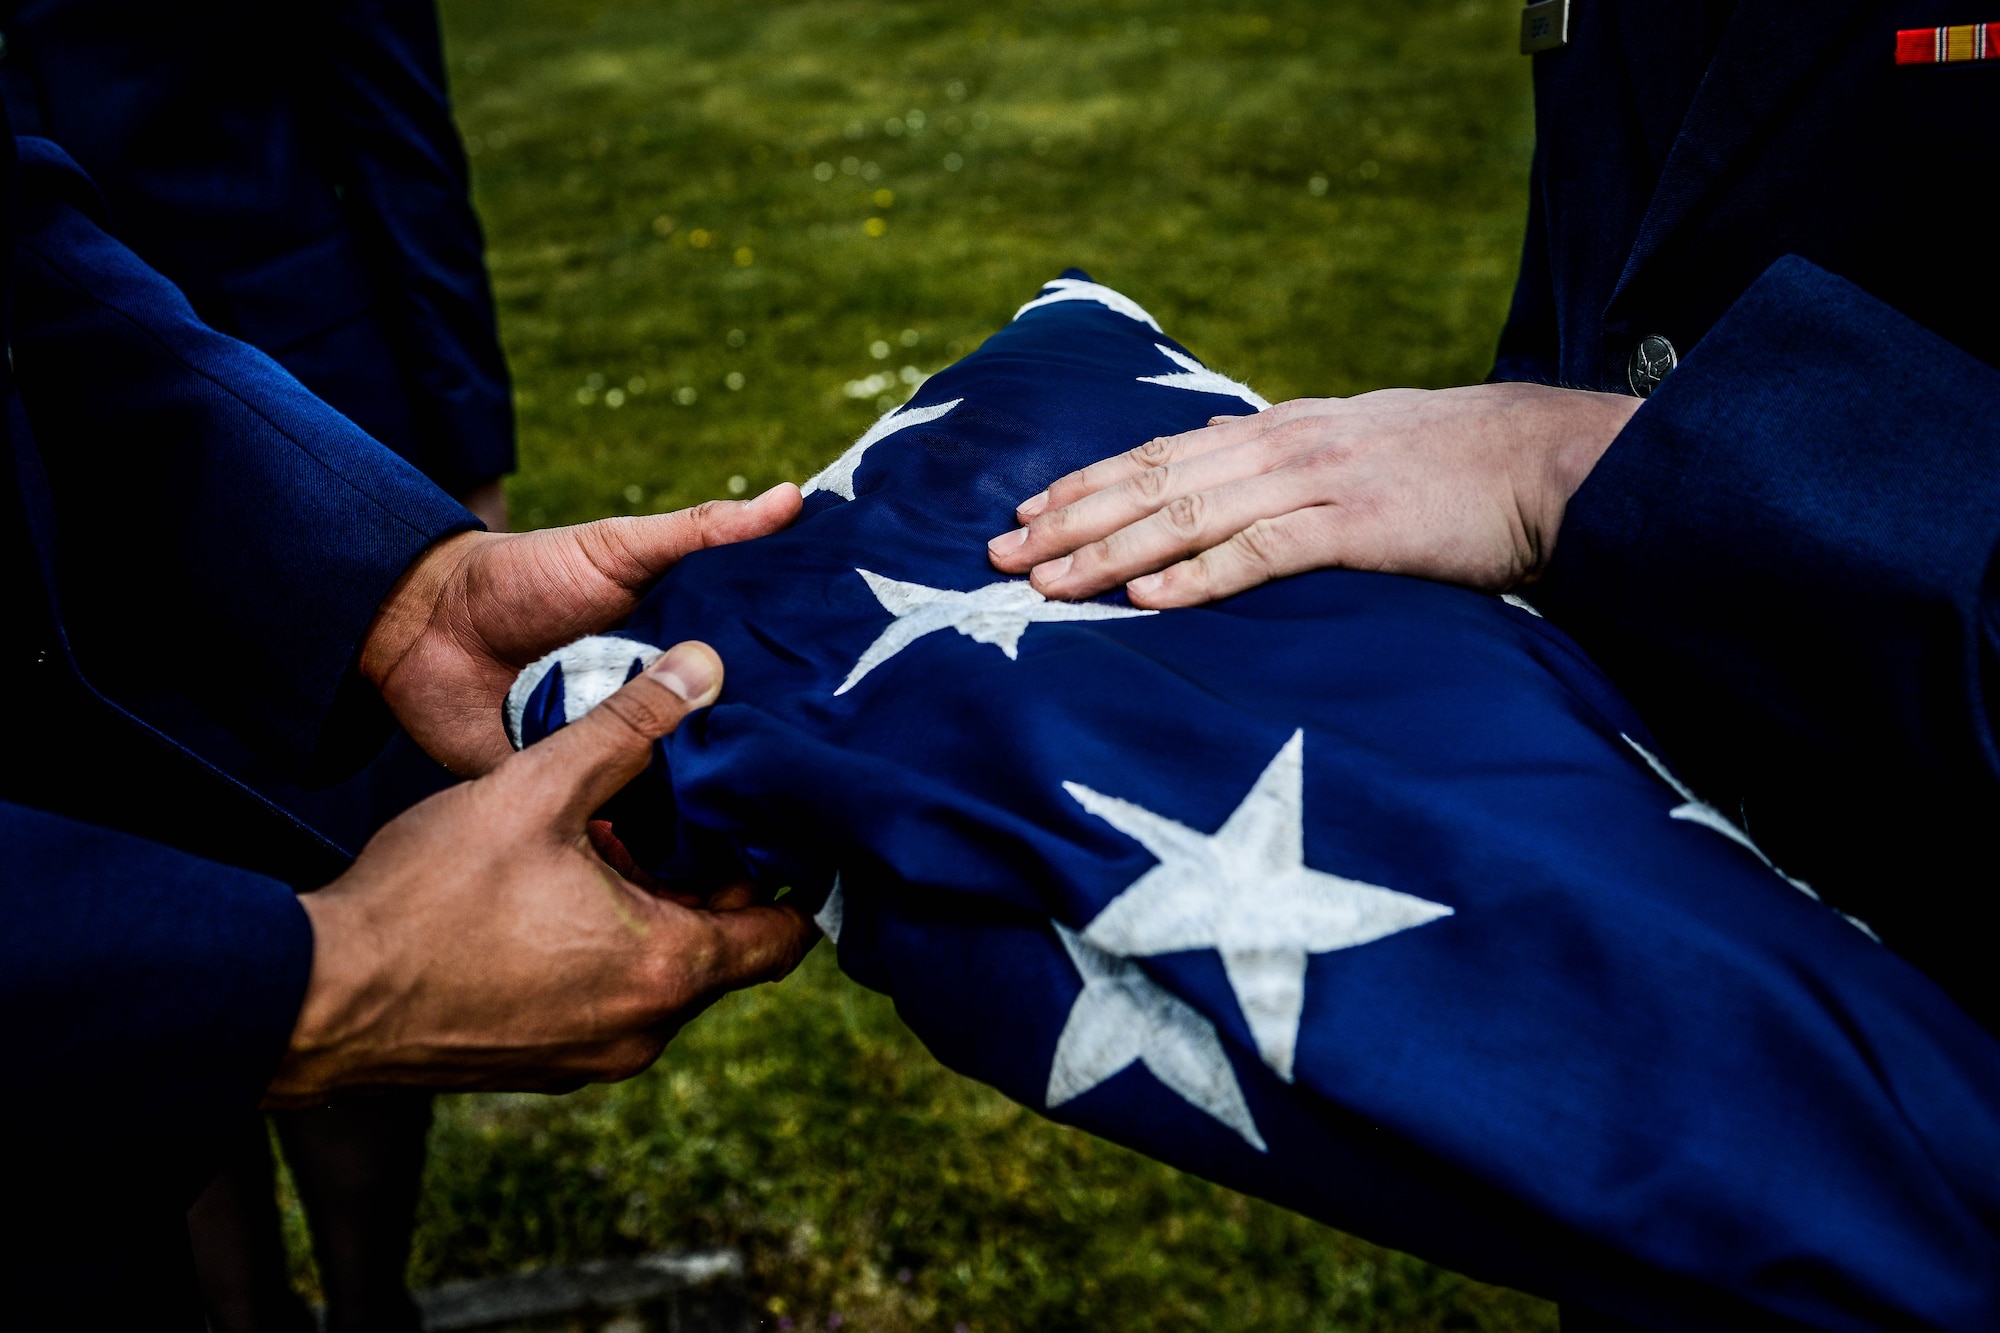 Airmen from the 86th Operations Group hold the U.S. flag during a retreat and remembrance ceremony April 29, 2016, at Ramstein Air Base, Germany.  Airmen from the 86th Operations Group gathered for the ceremony to recognize the Implementation Force 21 crew from the 76th Airlift Squadron who gave the ultimate sacrifice 20 years ago when their aircraft was lost during an approach into Dubrovnik, Croatia. (U.S. Air Force photo/Senior Airman Nicole Keim)